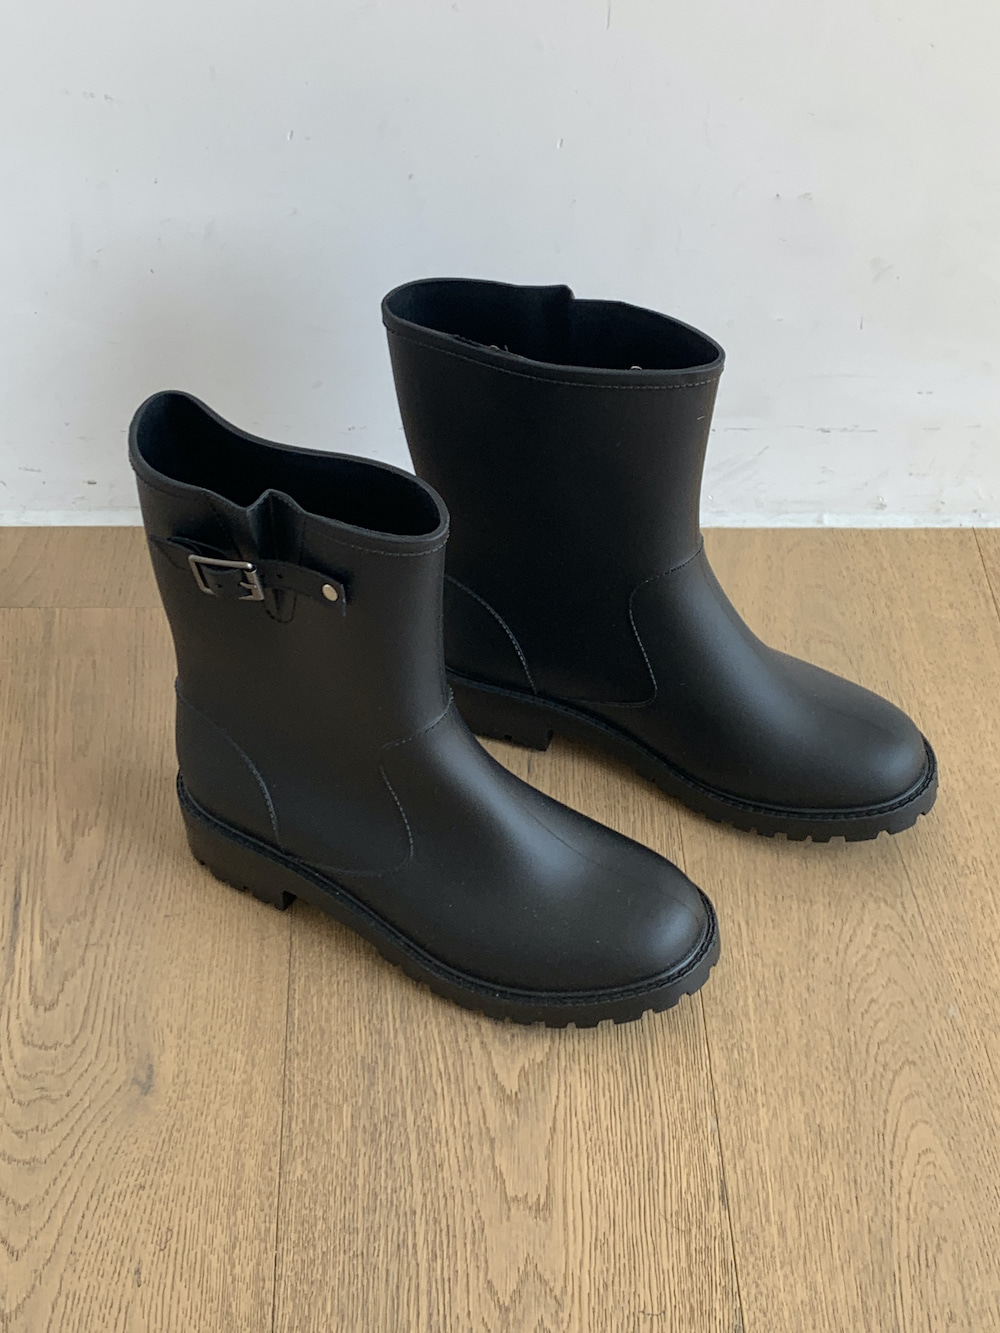 Buckle middle rain boots